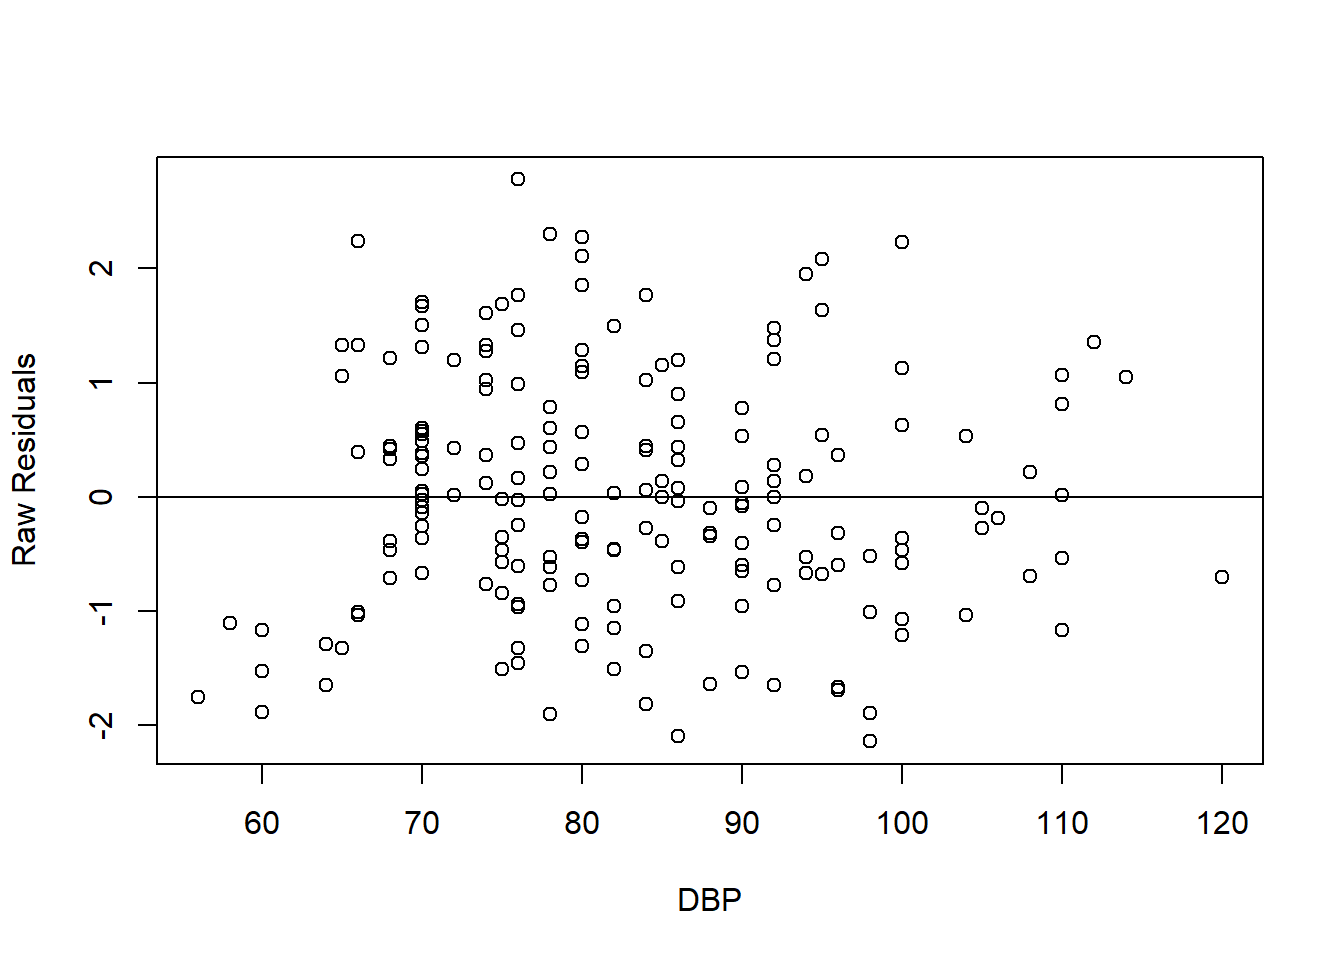 Scatter plot of raw residuals vs DBP (numerical predictor).